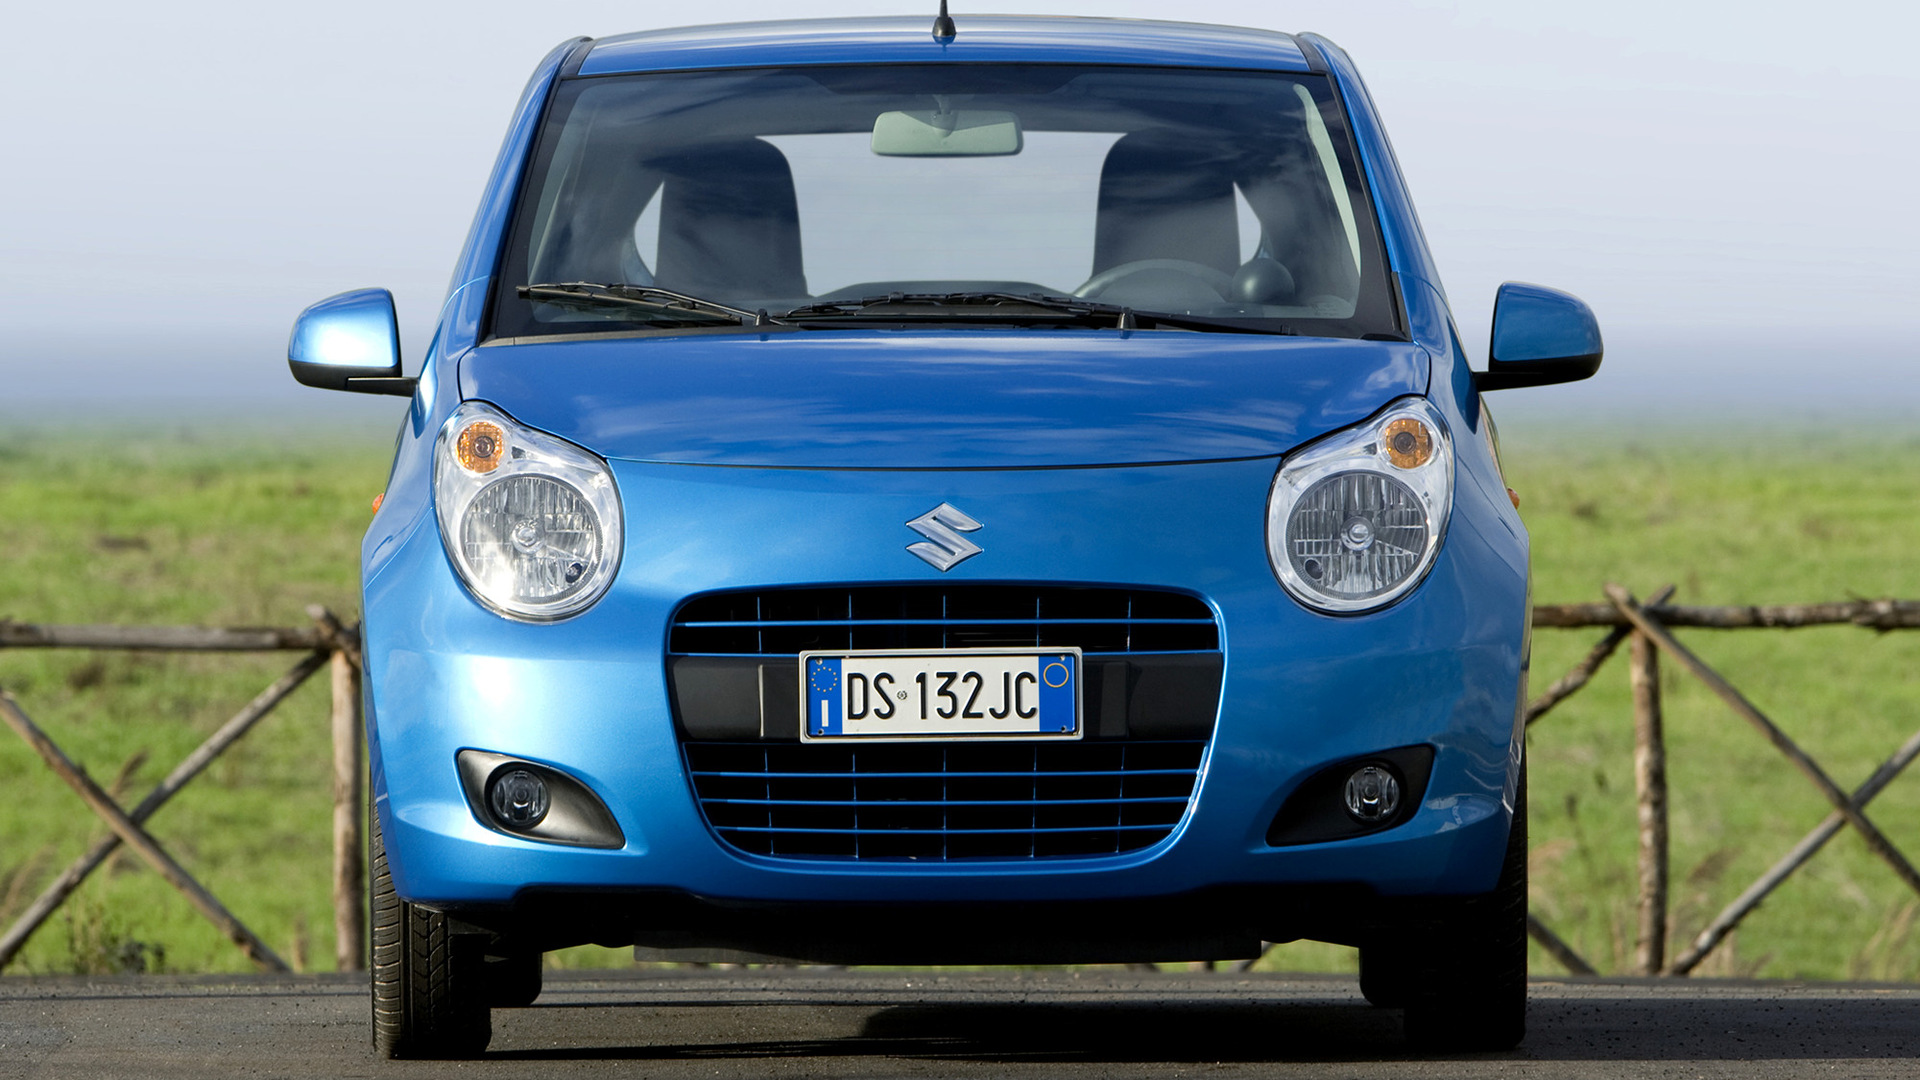 2008 Suzuki Alto   Wallpapers and HD Images Car Pixel 1920x1080